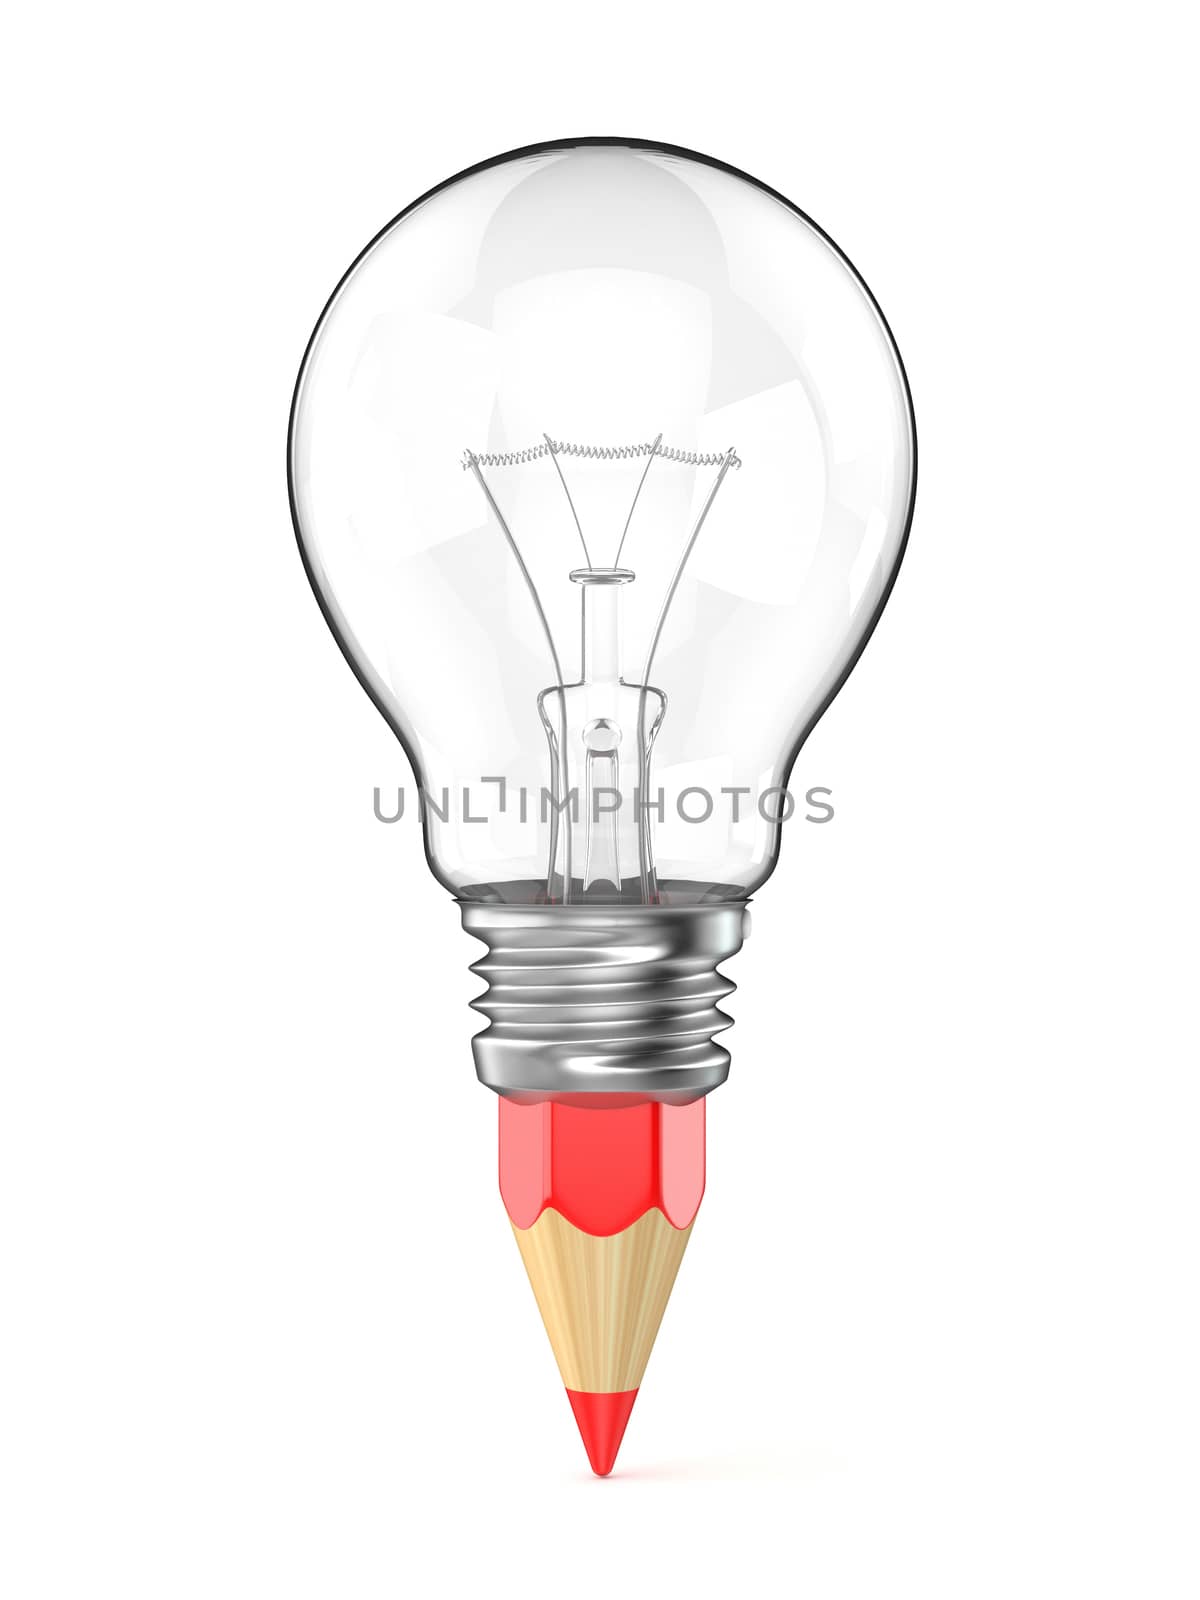 Pencil light bulb as creative concept. 3D render illustration isolated on white background